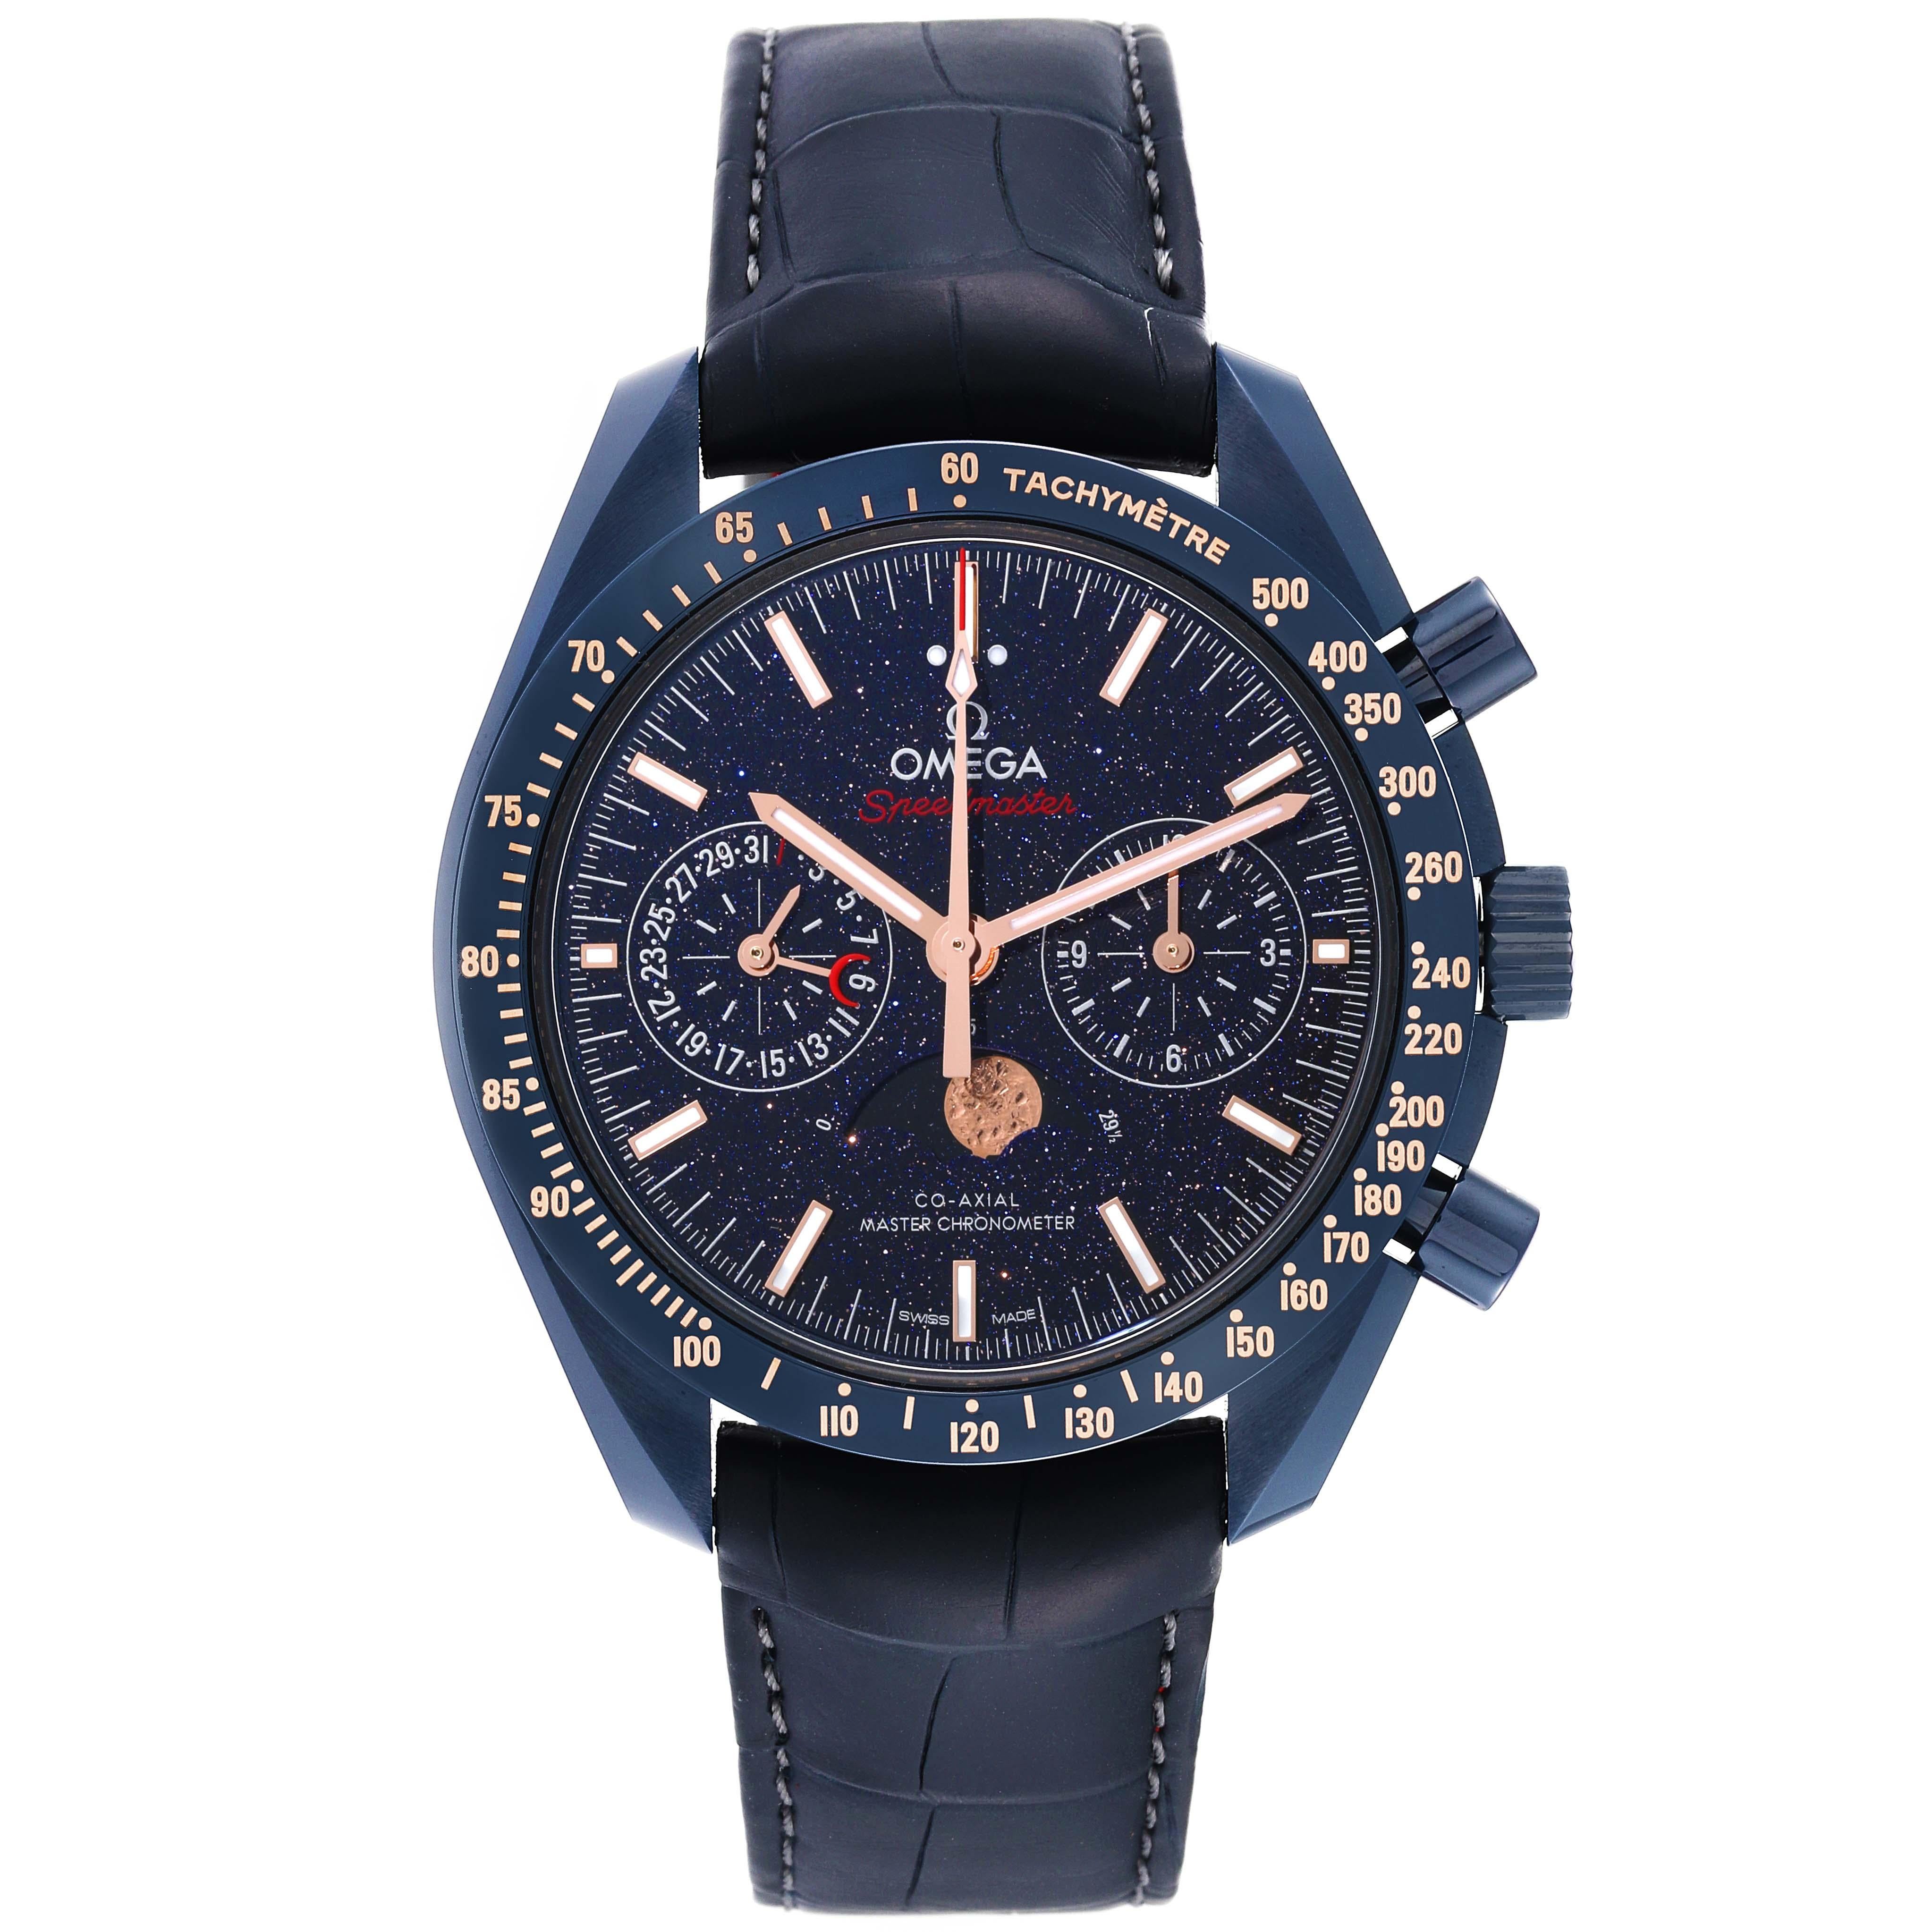 Omega Speedmaster Blue Side of the Moon Mens Watch 304.93.44.52.03.002 Box Card. Automatic self-winding chronograph movement with column wheel mechanism and Co-Axial Escapement. Silicon balance-spring on free sprung-balance, 2 barrels mounted in